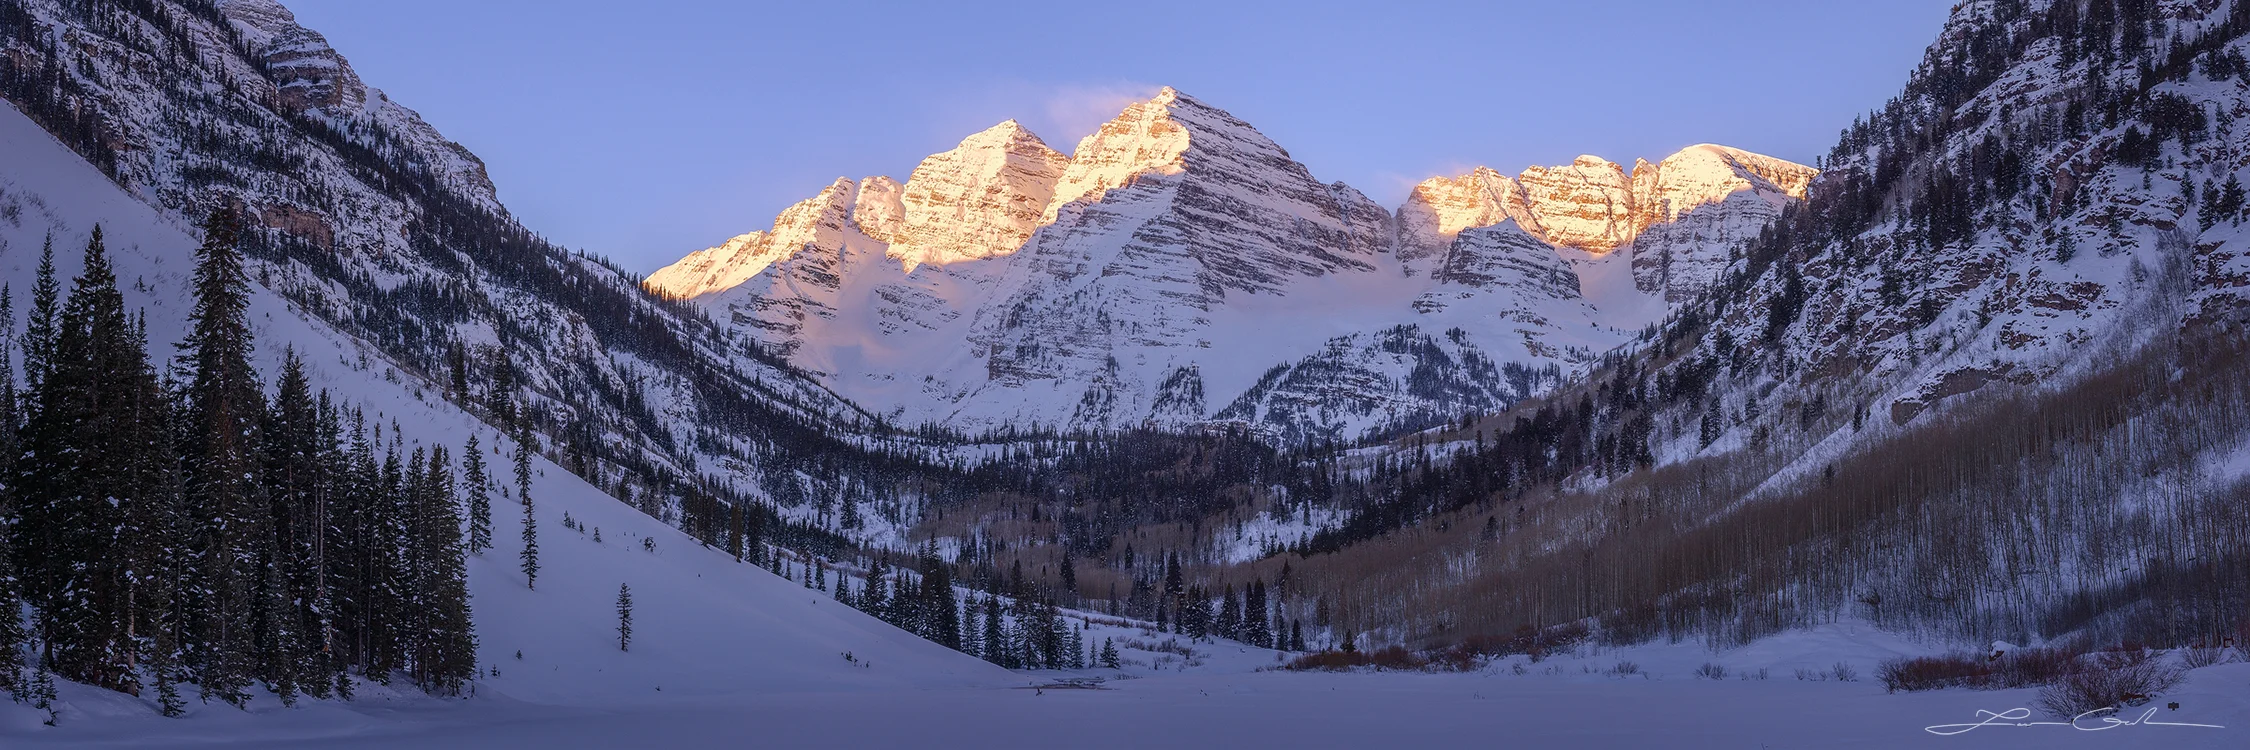 Maroon Bells Wonderland fine art photo print showcasing the beautiful Maroon Bells in January with snow-covered slopes, pine and aspen trees, and morning light. - Gintchin Fine Art